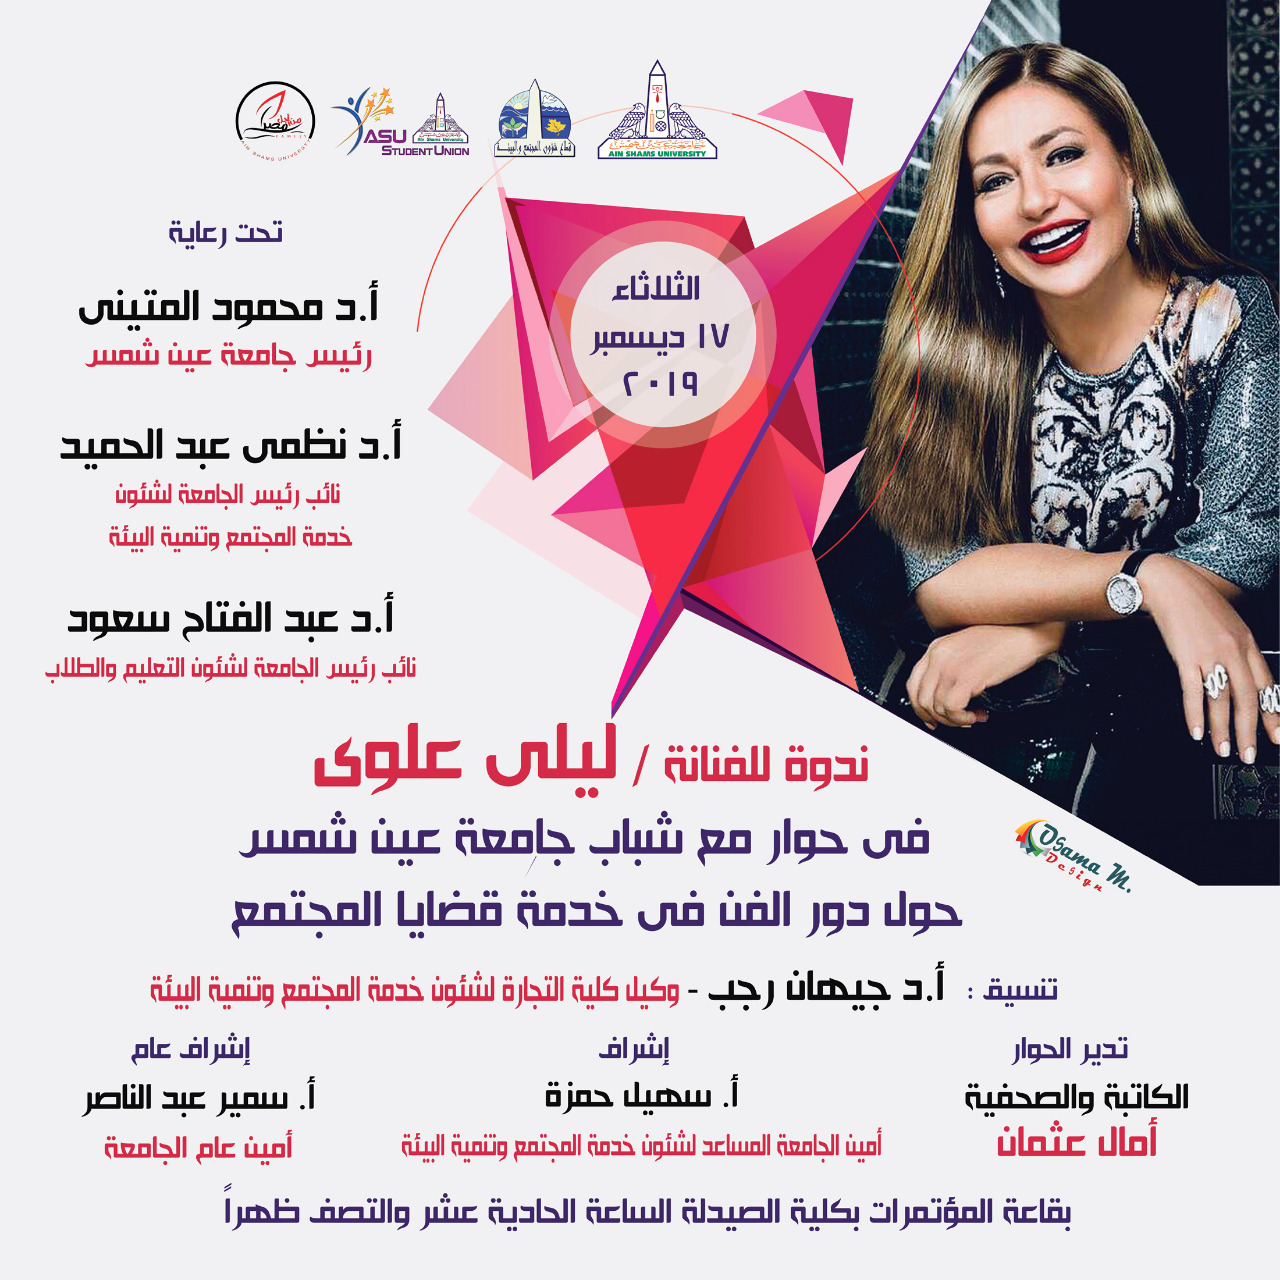 December 17 ... Laila Elwi in an open dialogue with Ain Shams University students